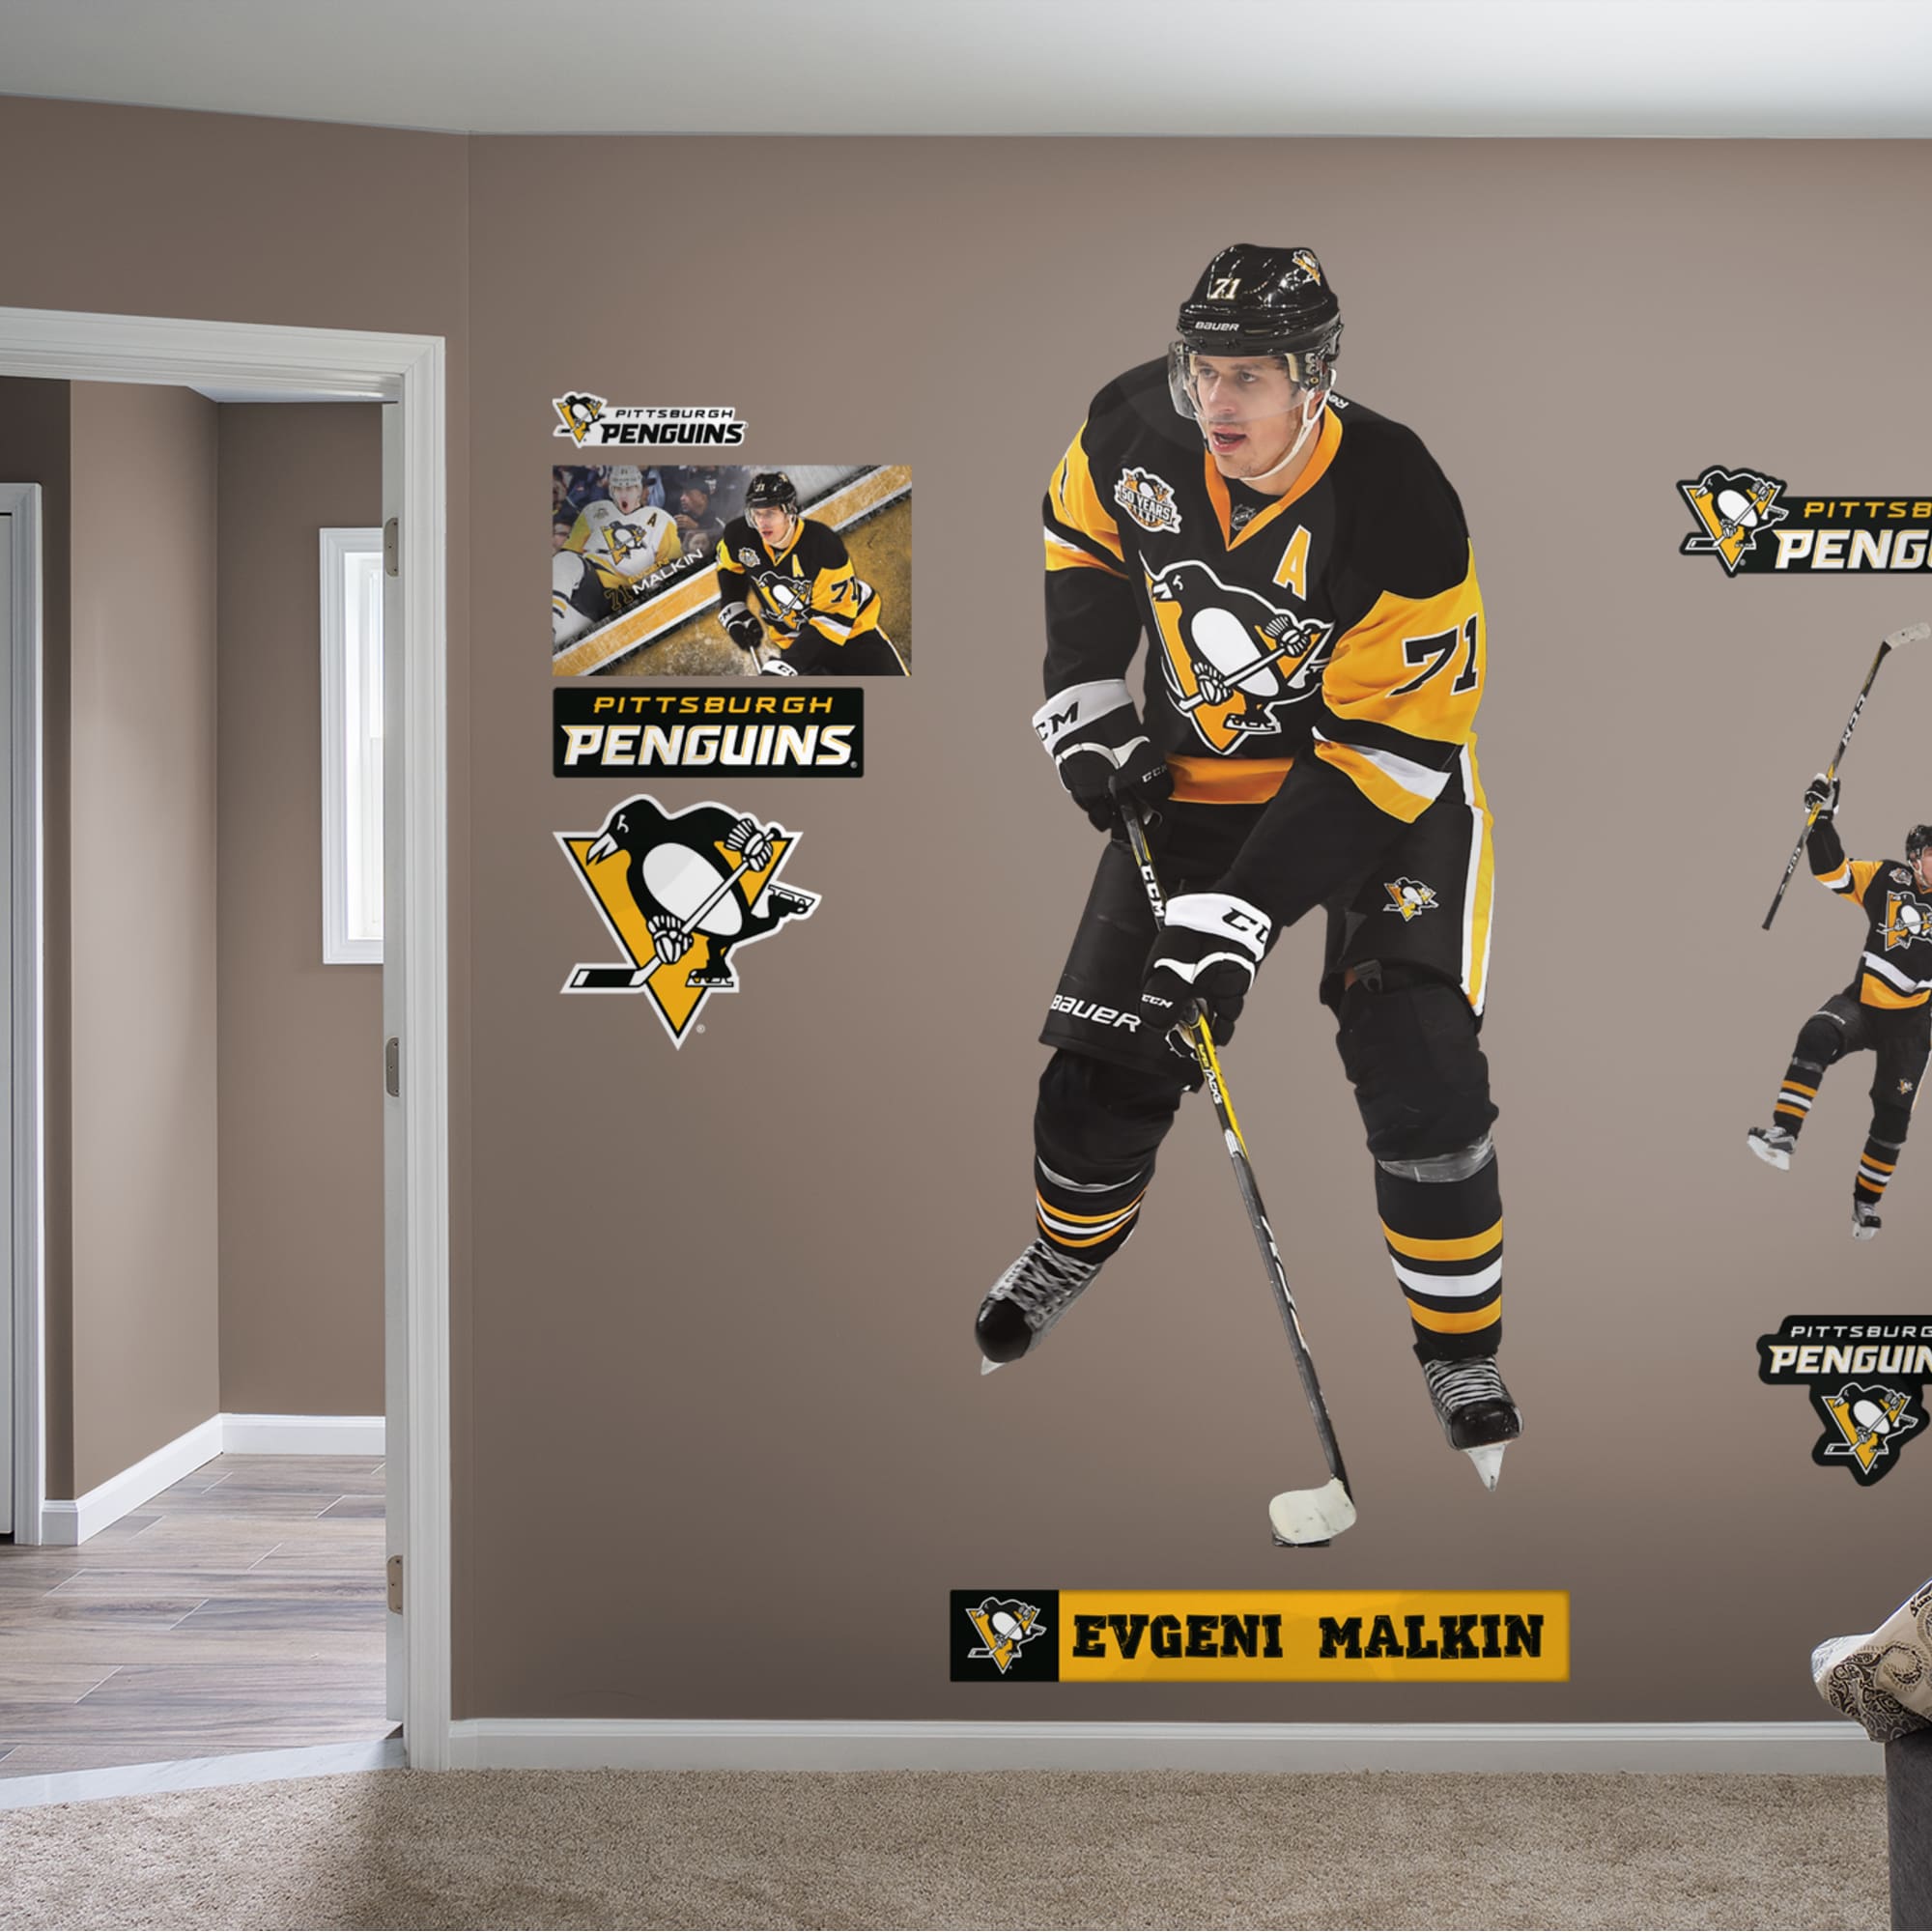 Evgeni Malkin for Pittsburgh Penguins - Officially Licensed NHL Removable Wall Decal Athlete + 9 Team Decals (32"W x 77"H) by Fa